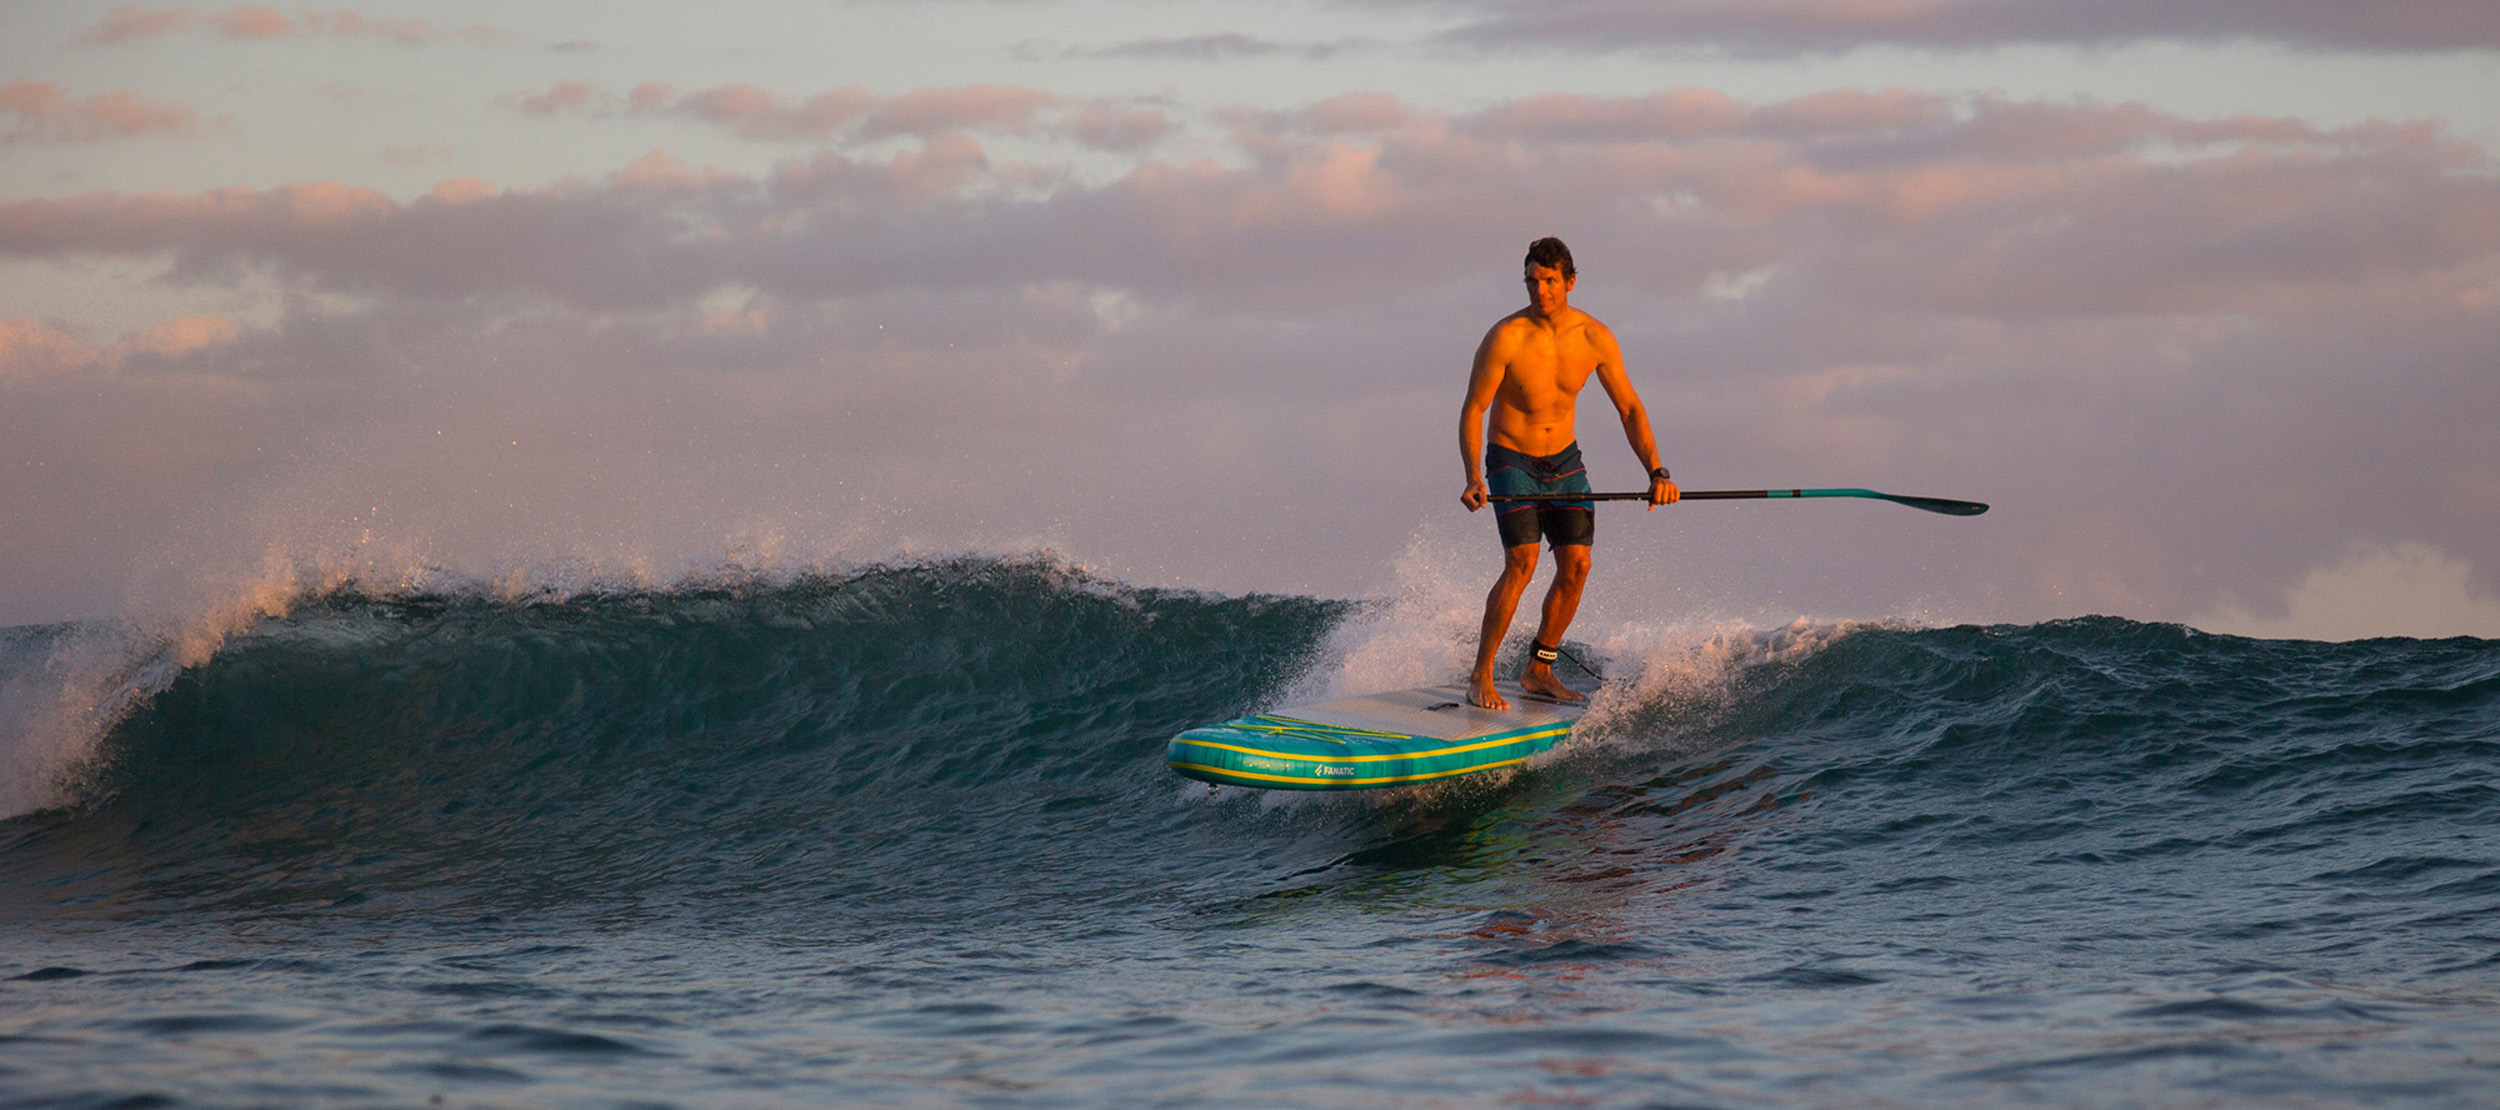 Guide - Comment bien choisir son Stand Up Paddle ? - SupFactory Blog